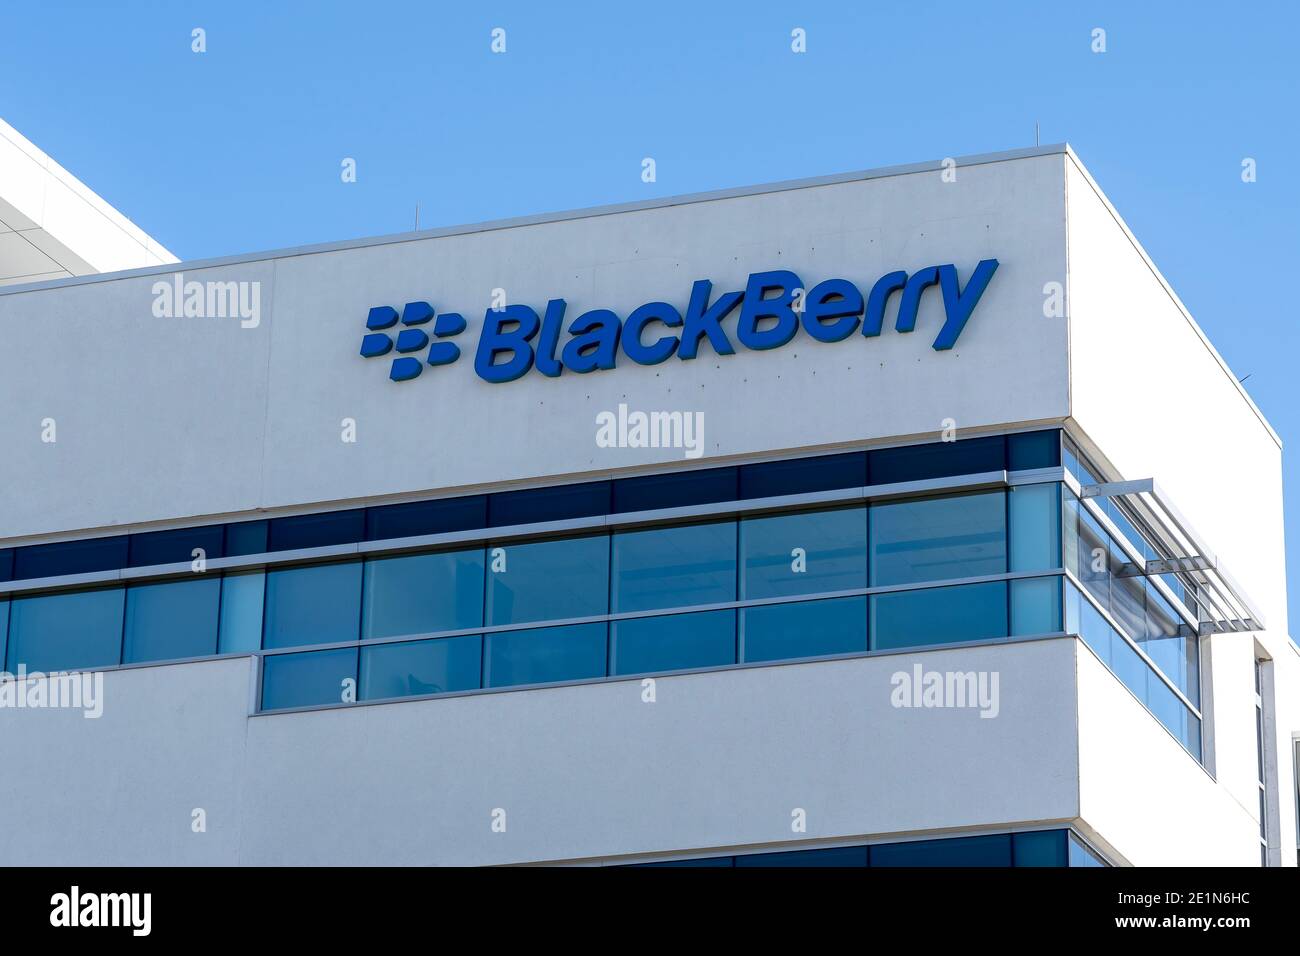 Waterloo, On, Canada - October 17, 2020: BlackBerry sign on their headquarters building is seen in Waterloo, Ontario, Canada. Stock Photo